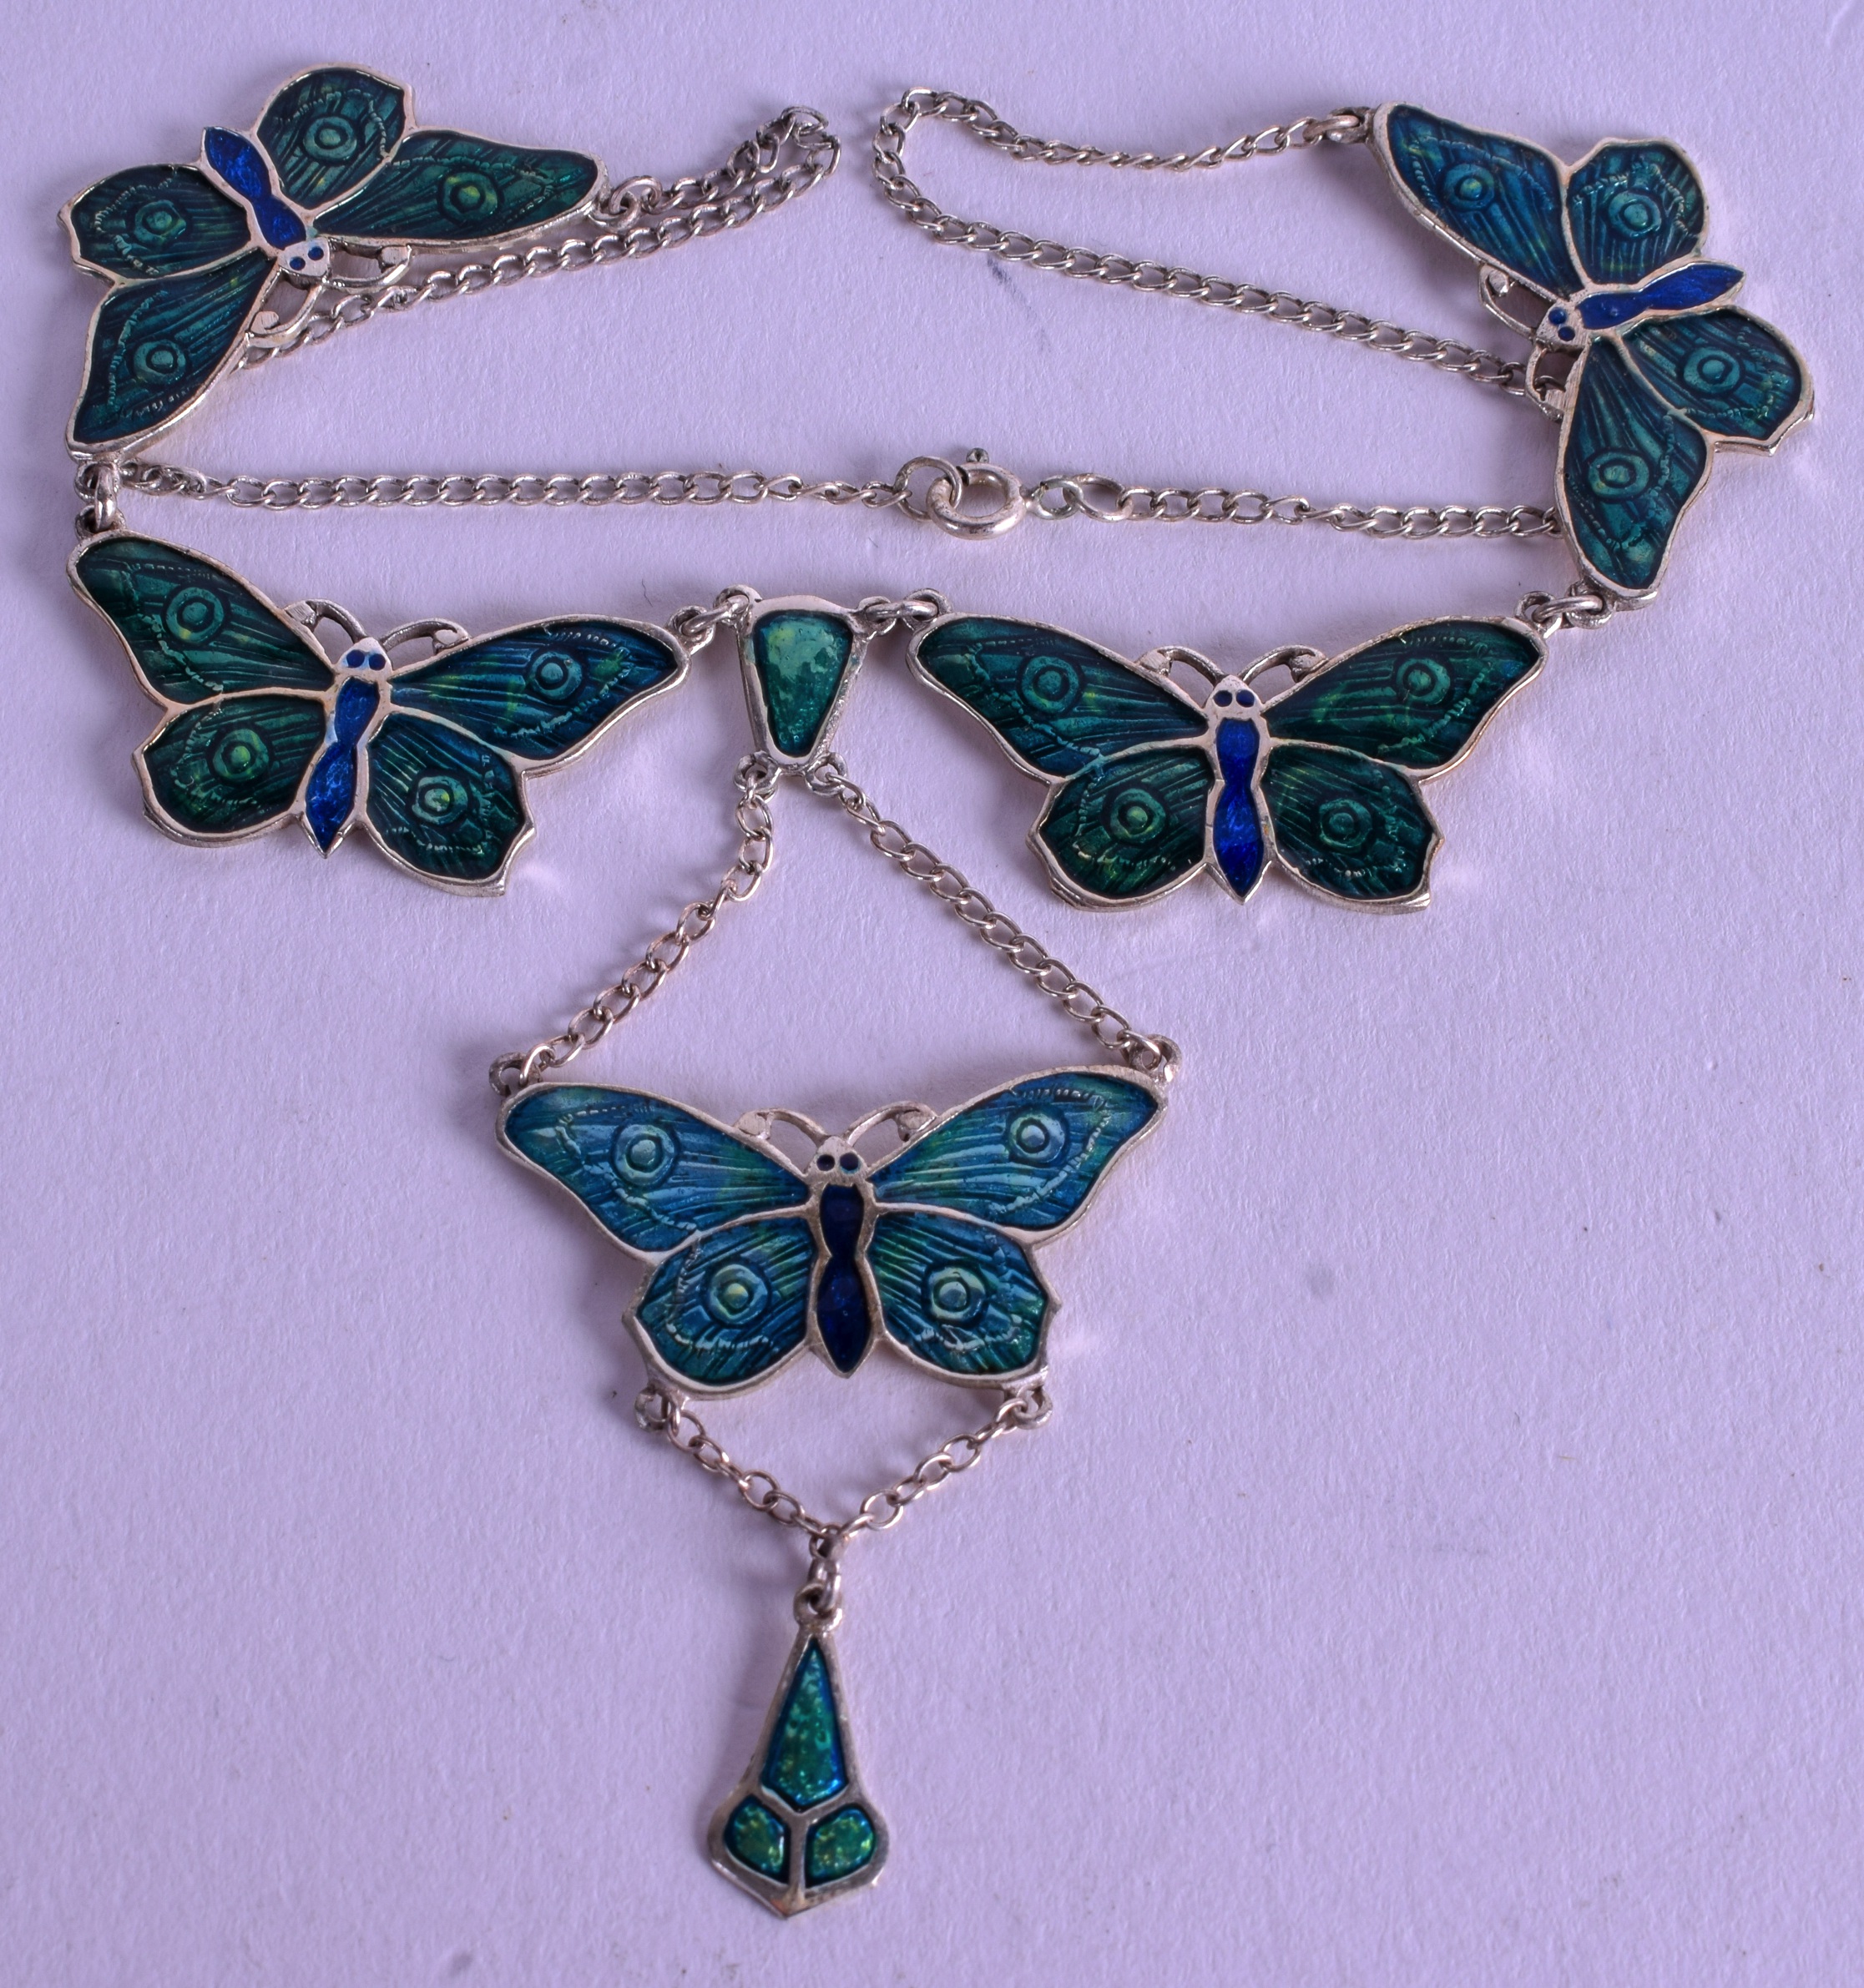 A SILVER AND ENAMEL BUTTERFLY NECKLACE. 42 cm long.